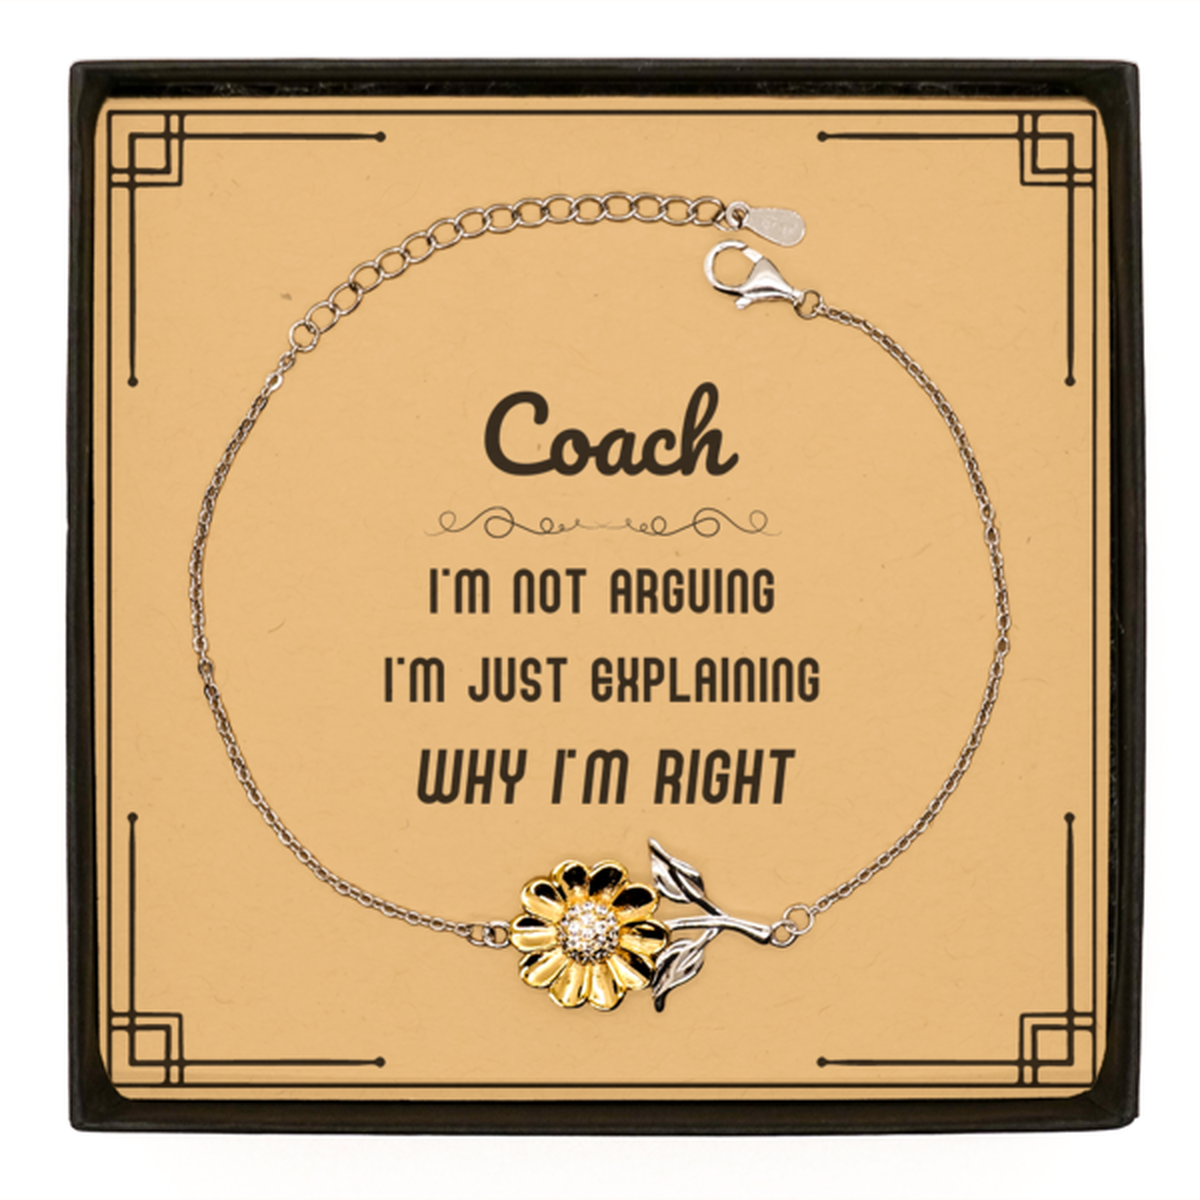 Coach I'm not Arguing. I'm Just Explaining Why I'm RIGHT Sunflower Bracelet, Funny Saying Quote Coach Gifts For Coach Message Card Graduation Birthday Christmas Gifts for Men Women Coworker